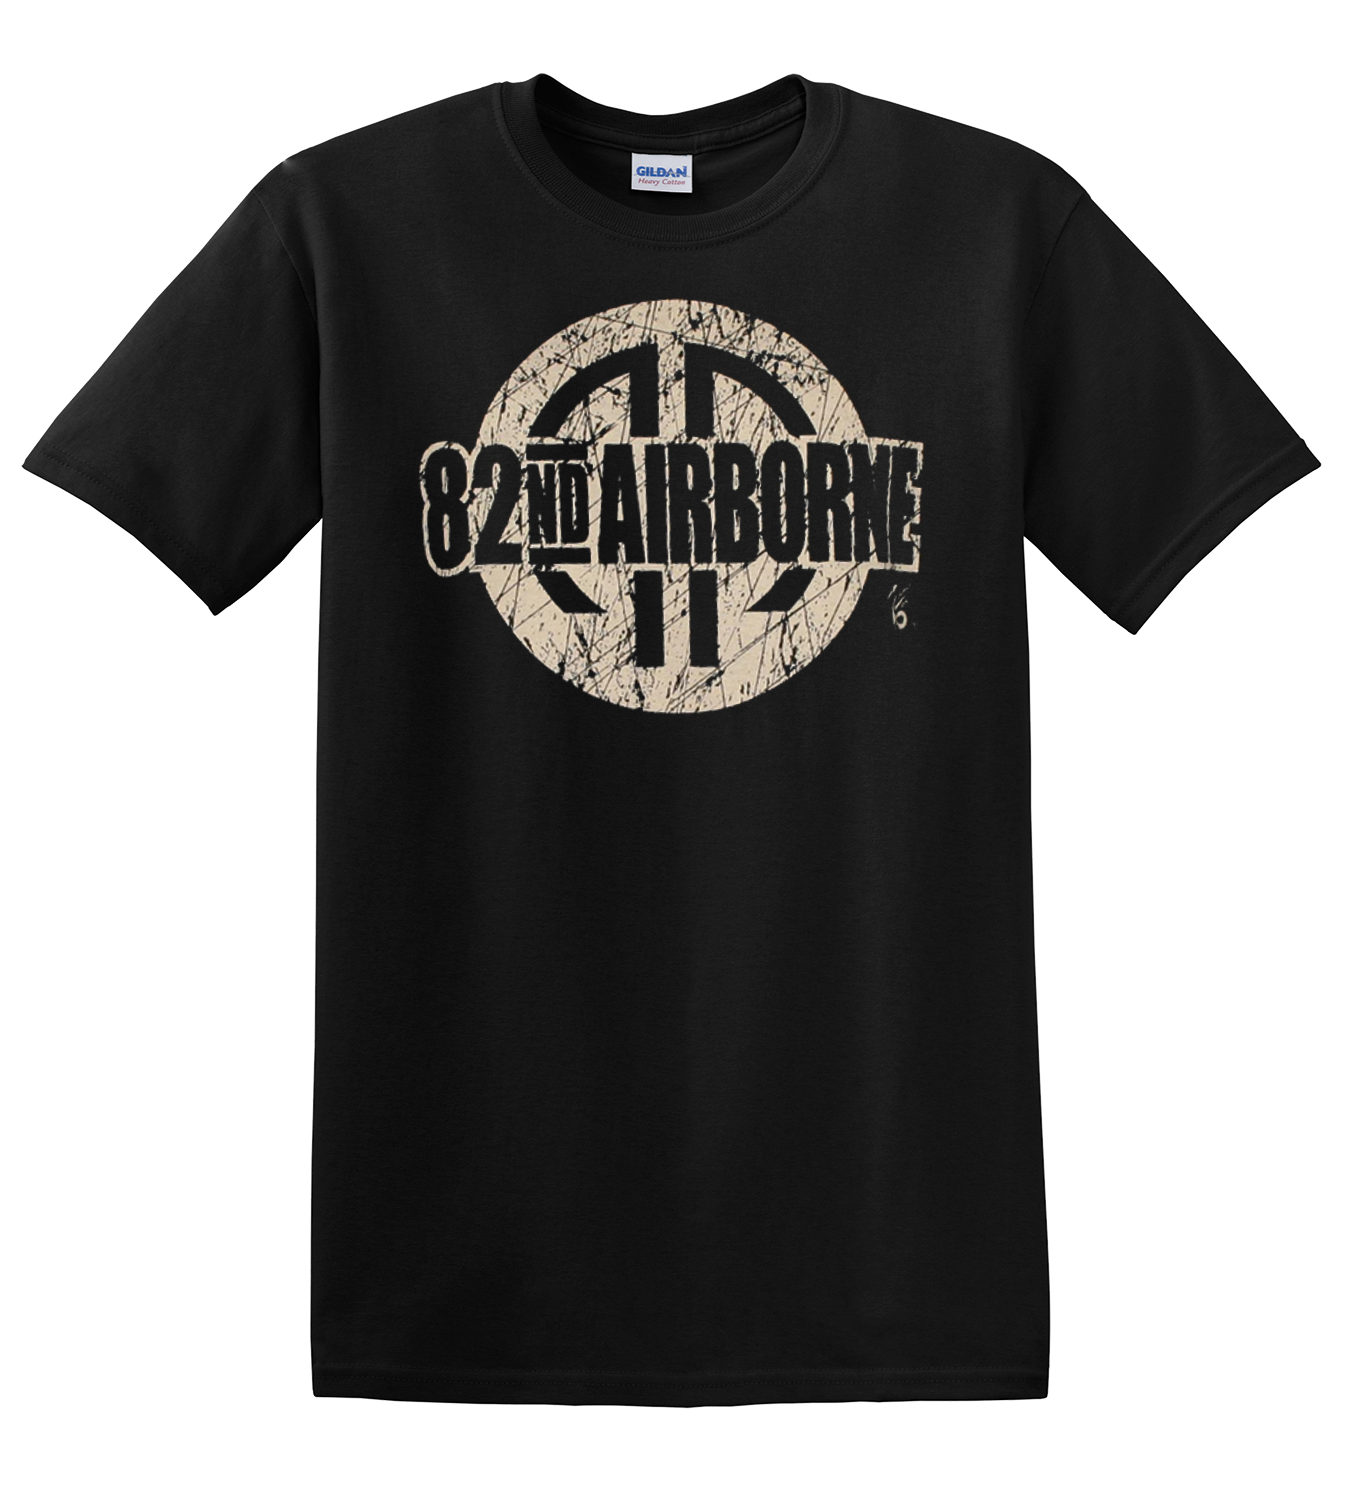 82nd Airborne Circle Design Distressed Cut Out on Black T Shirt